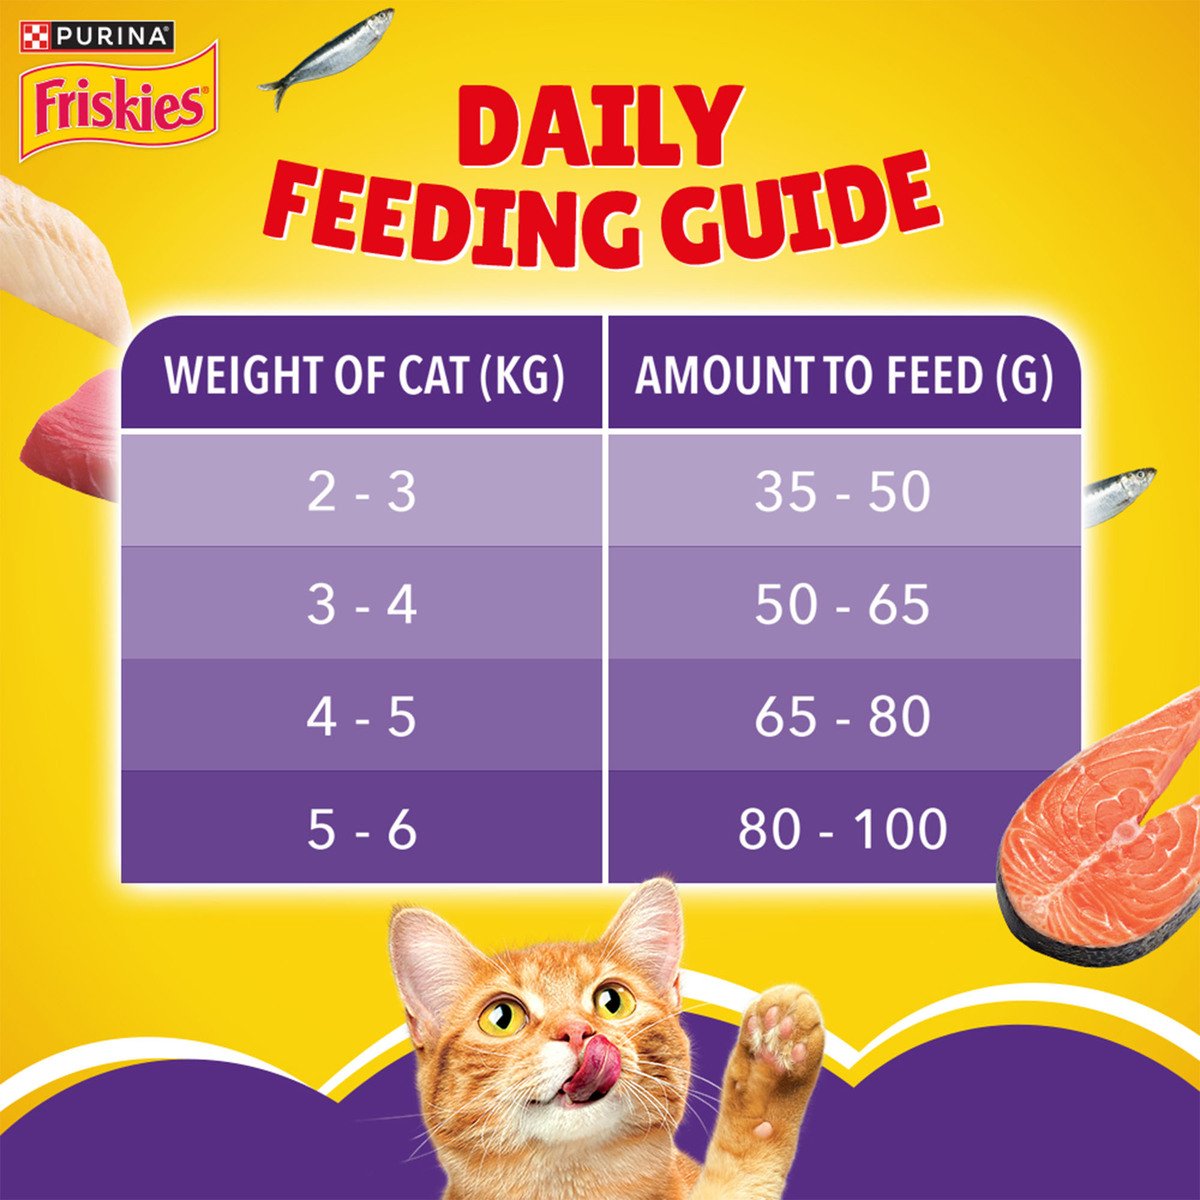 Purina Friskies Surfin Favourites Dry Cat Food 400 g